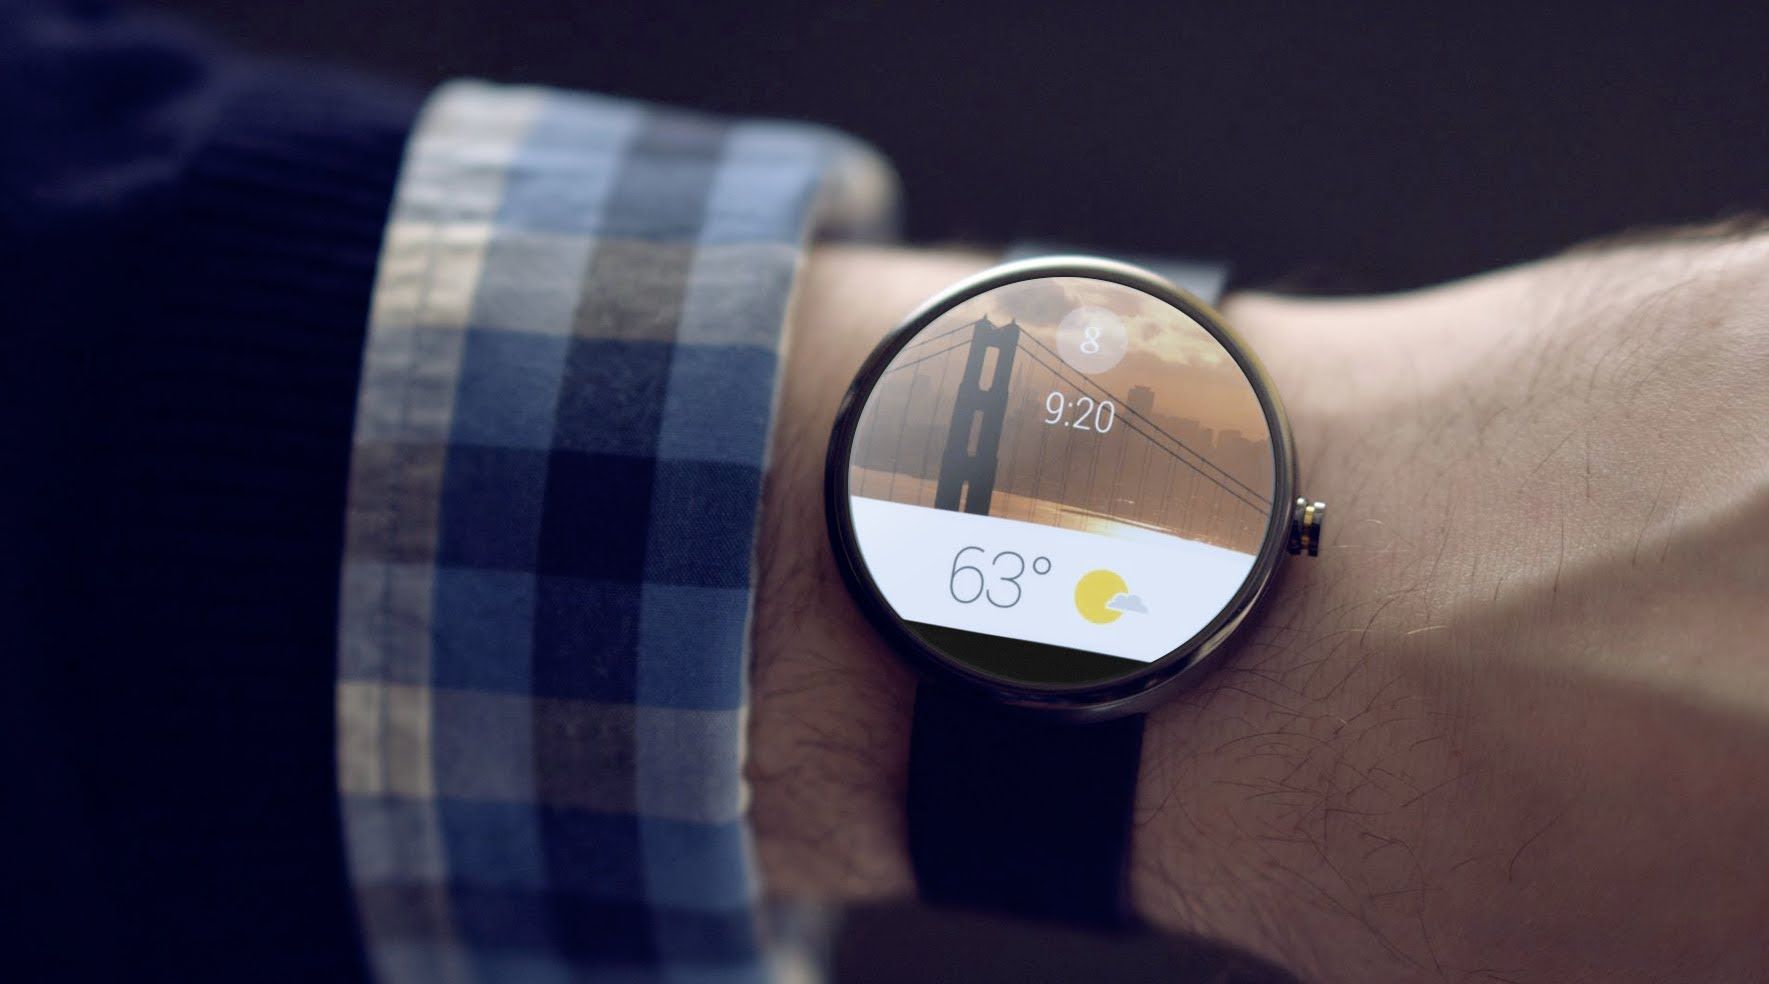 If Threes! Were a Smartwatch Game, It Might Look Something Like This